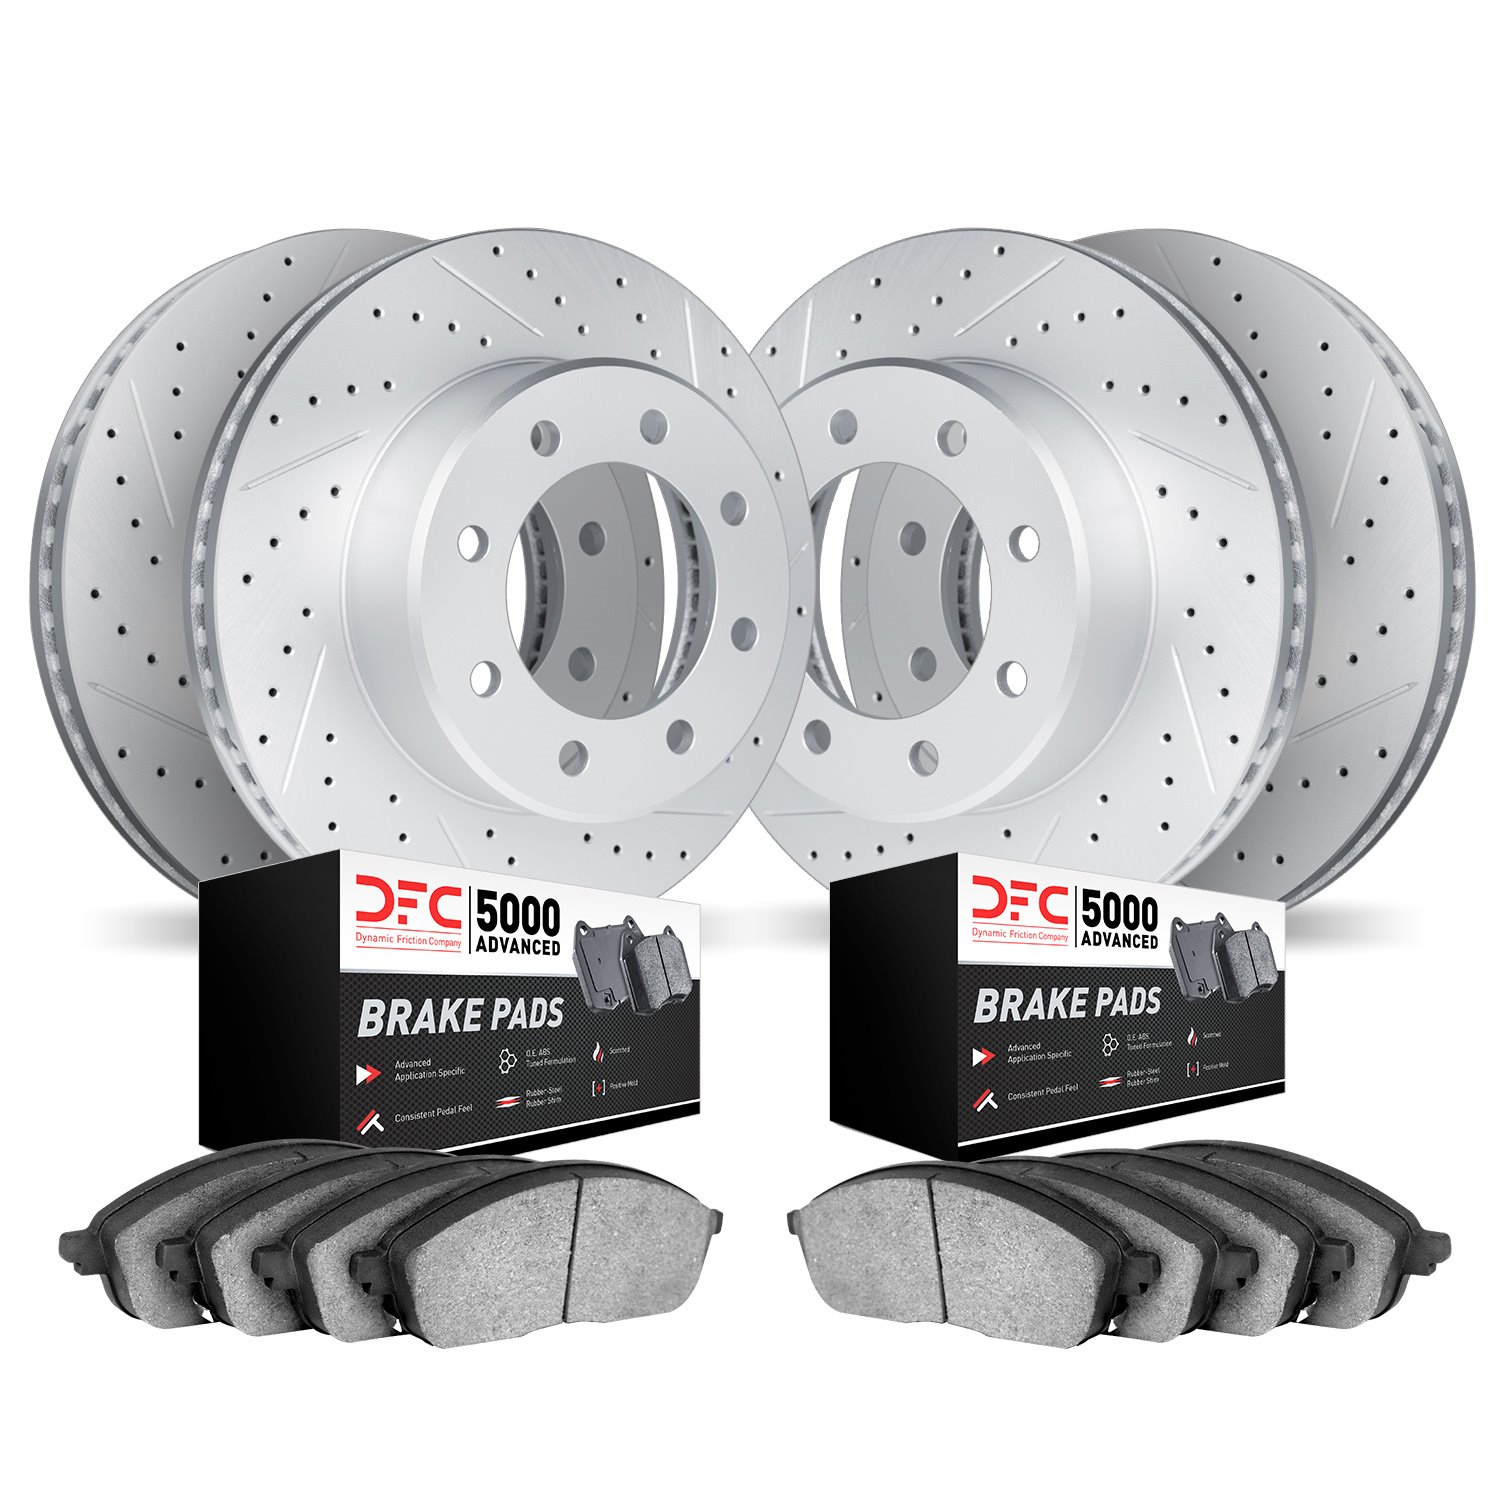 2504-54277 Geoperformance Drilled/Slotted Rotors w/5000 Advanced Brake Pads Kit, 2005-2007 Ford/Lincoln/Mercury/Mazda, Position: